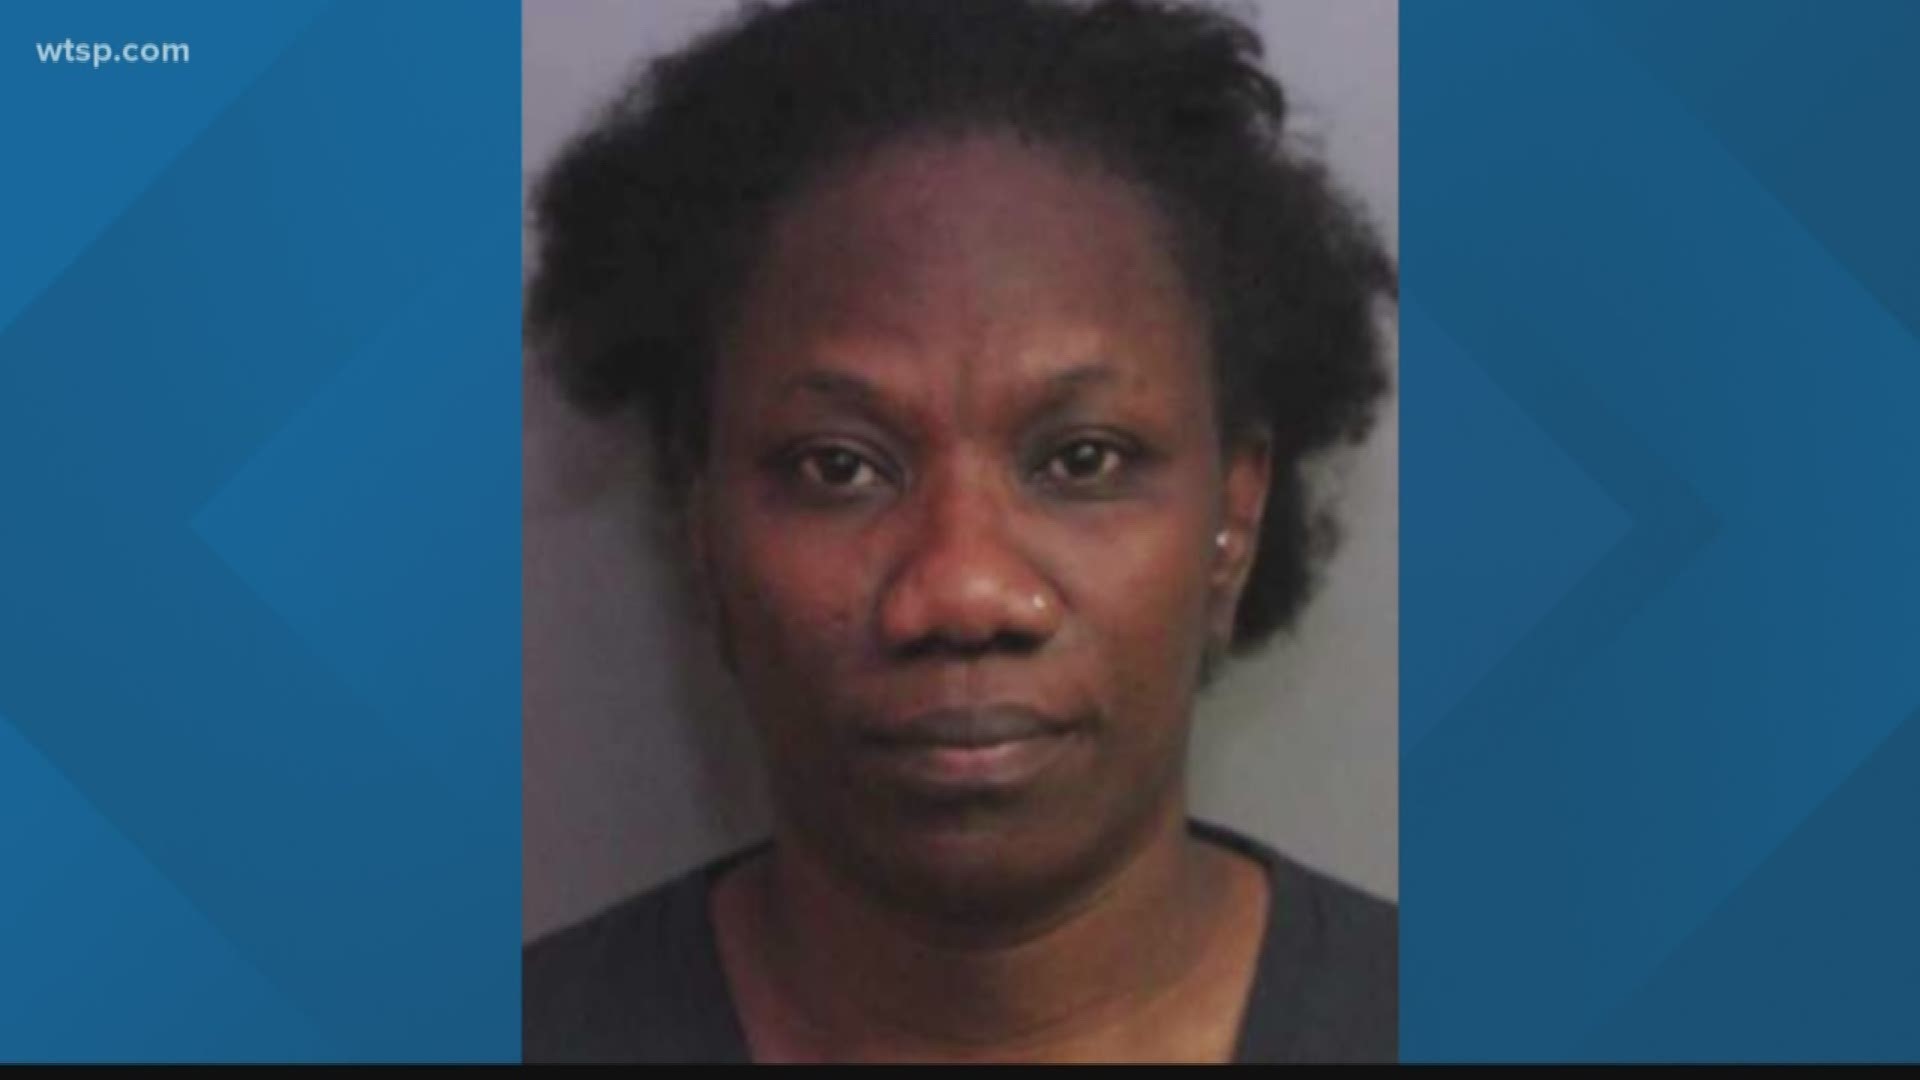 A Polk County bus attendant accused of abusing children and adults with disabilities was arrested again, according to the Polk County Sheriff’s Office.

Deputies said Juanita Tappin, 43, was arrested after a video showed more abuse.

Tappin was charged with one count of child abuse and one count of abuse of a disabled adult.